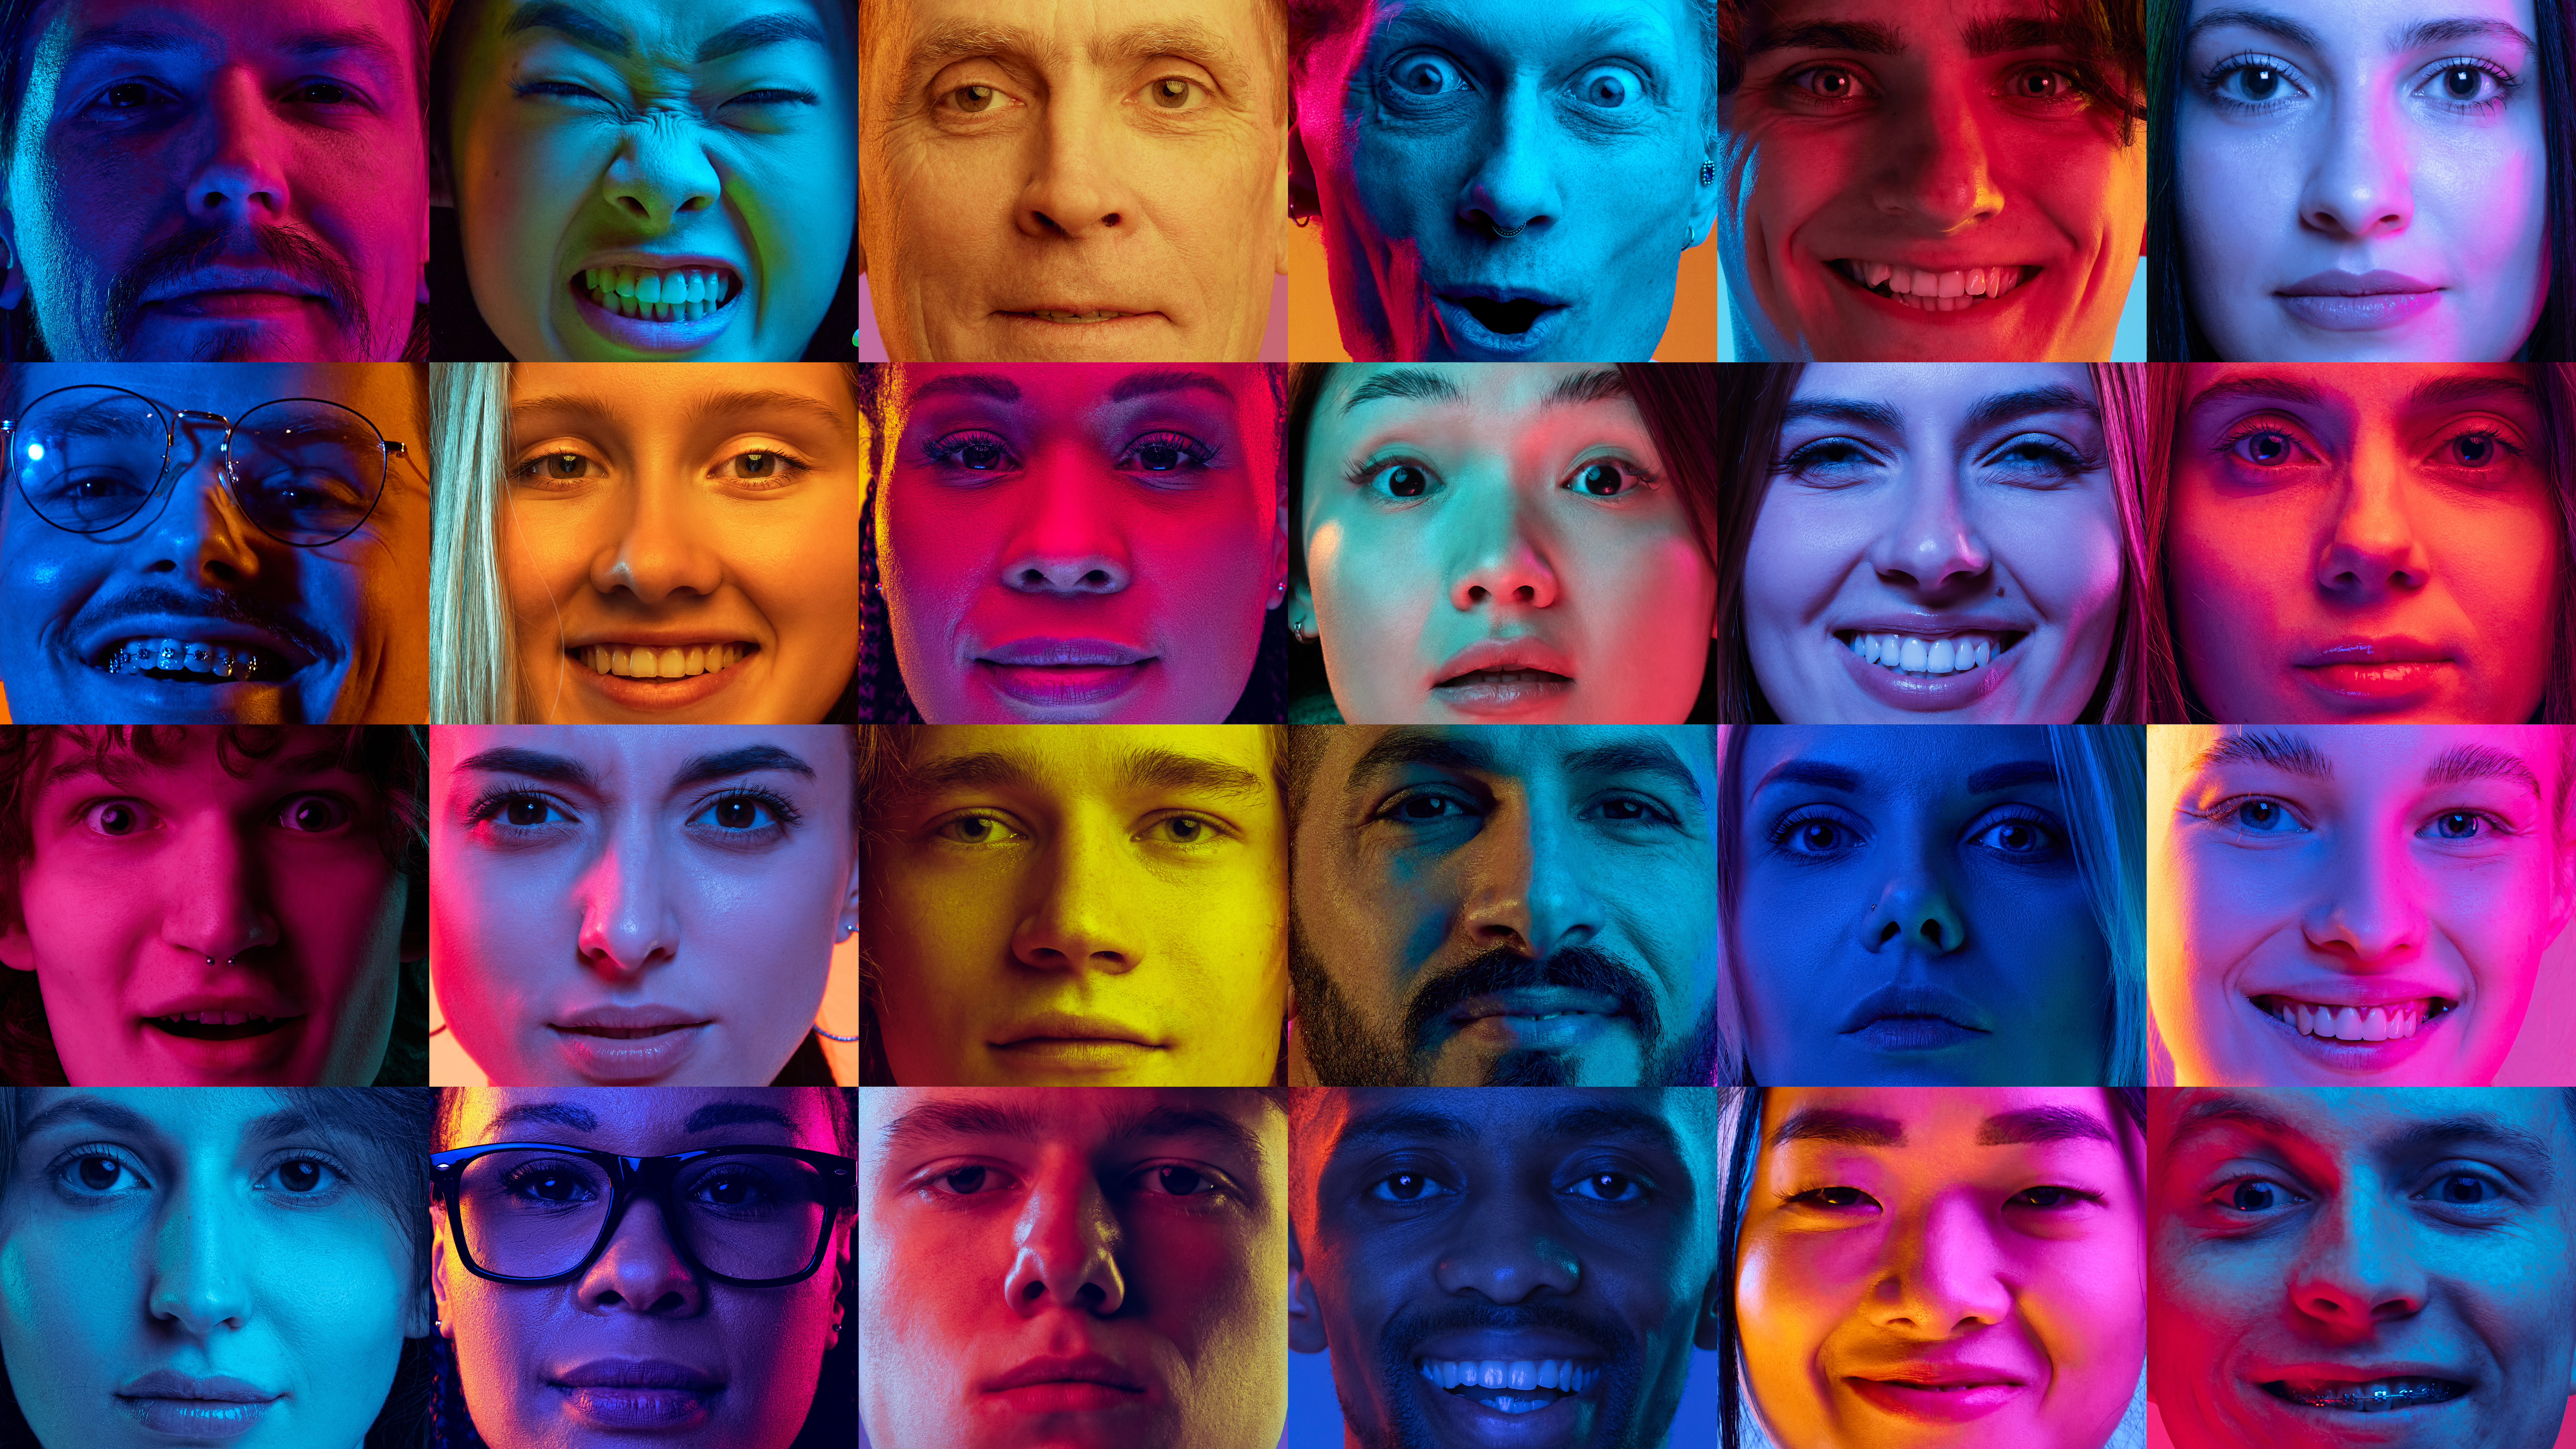 Collage made of close up portraits of different people, men and women looking at camera against multicolored background in neon light